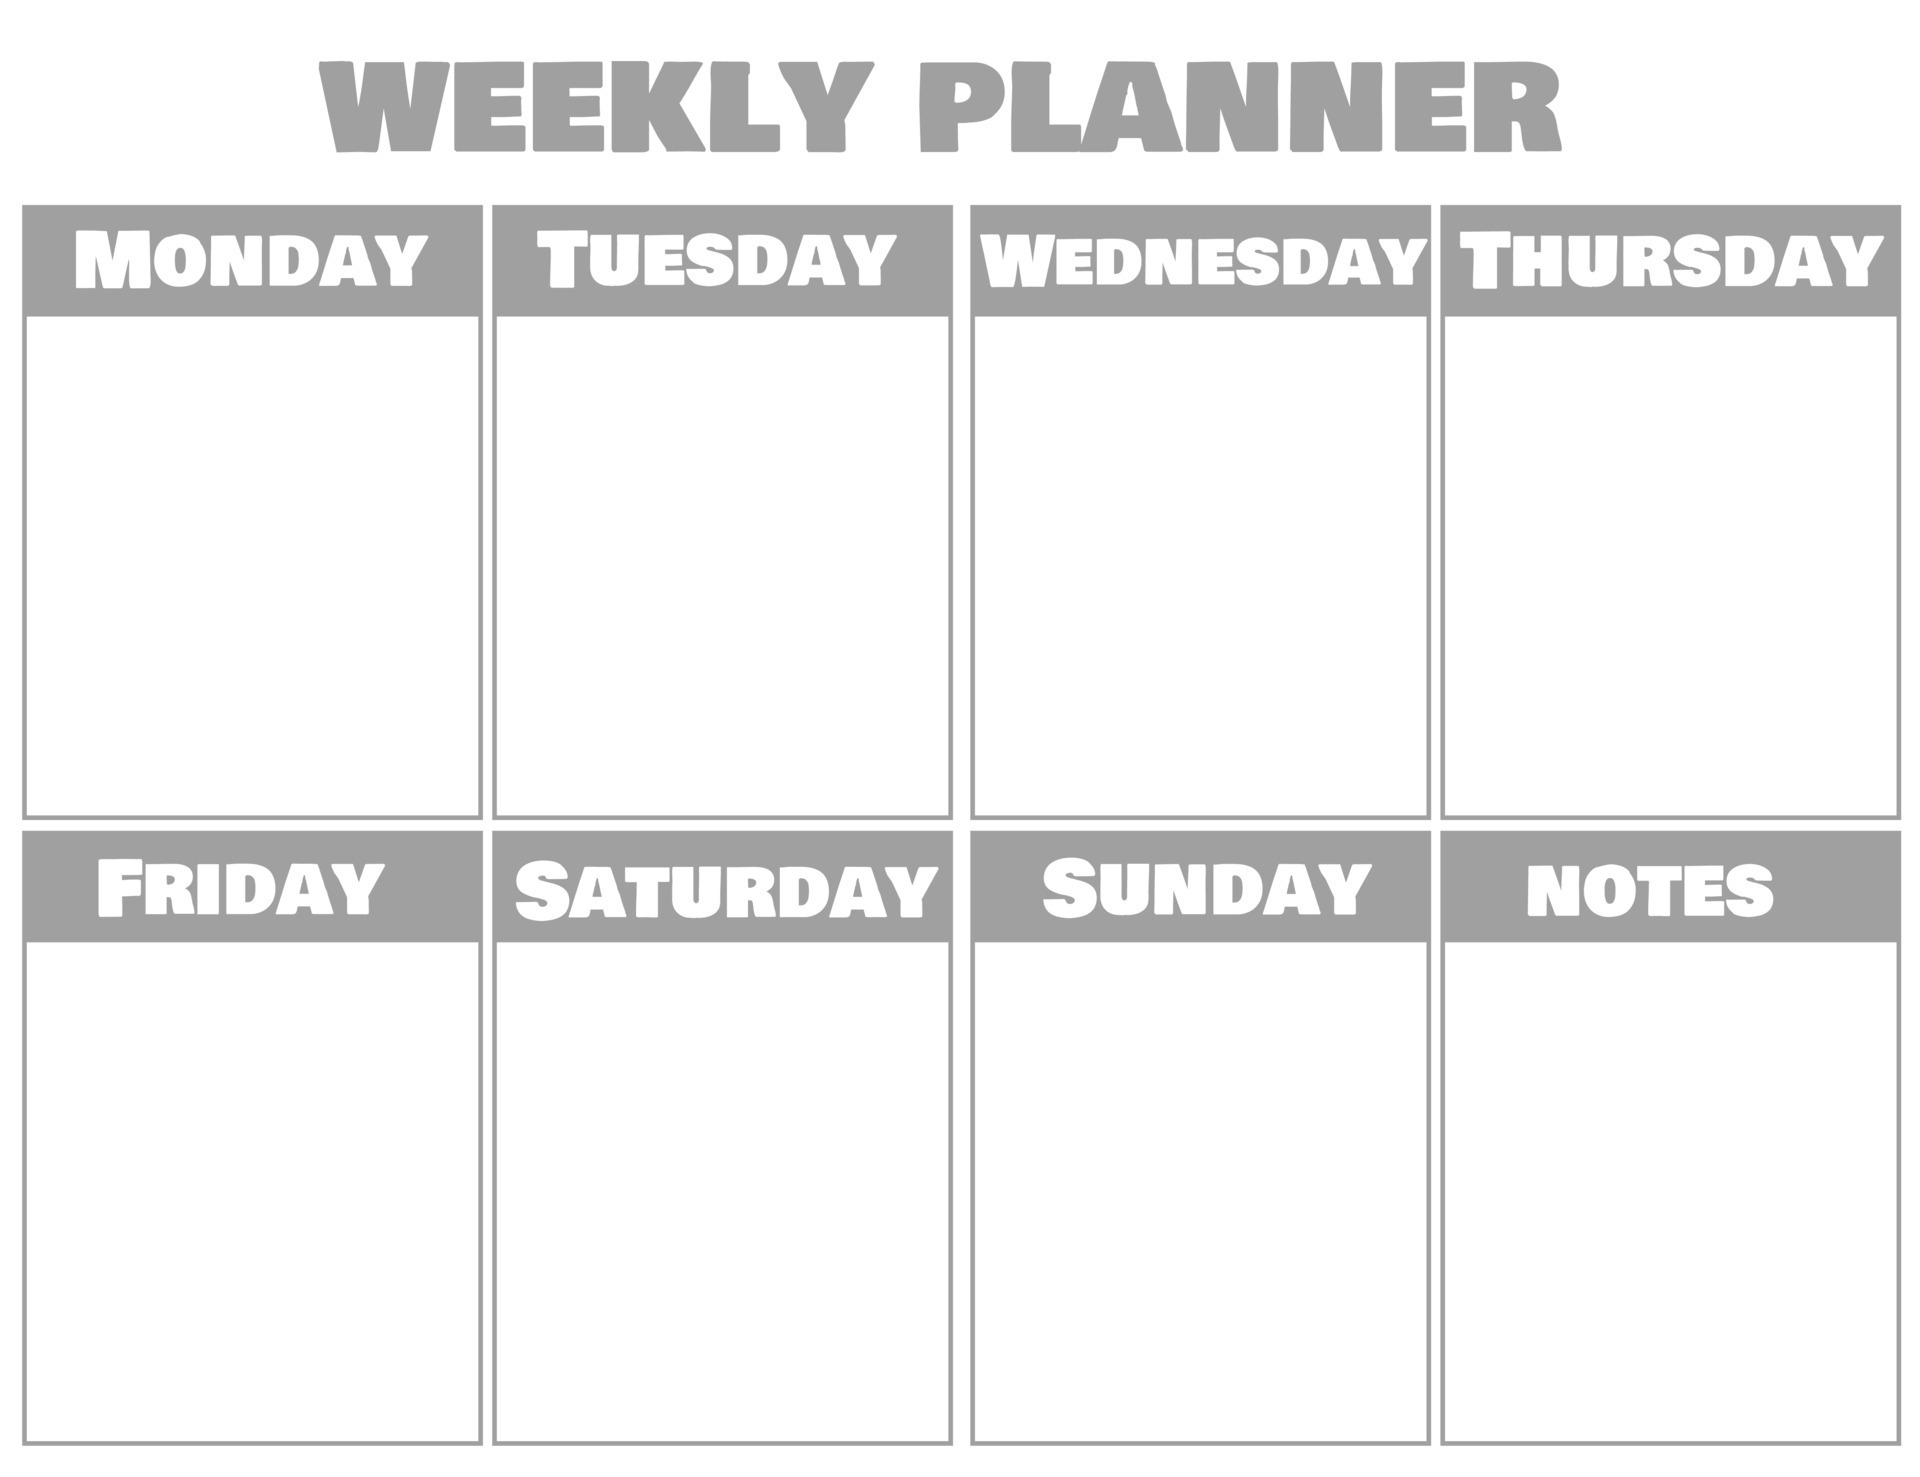 blank-weekly-planner-calendar-template-schedule-for-planning-for-the